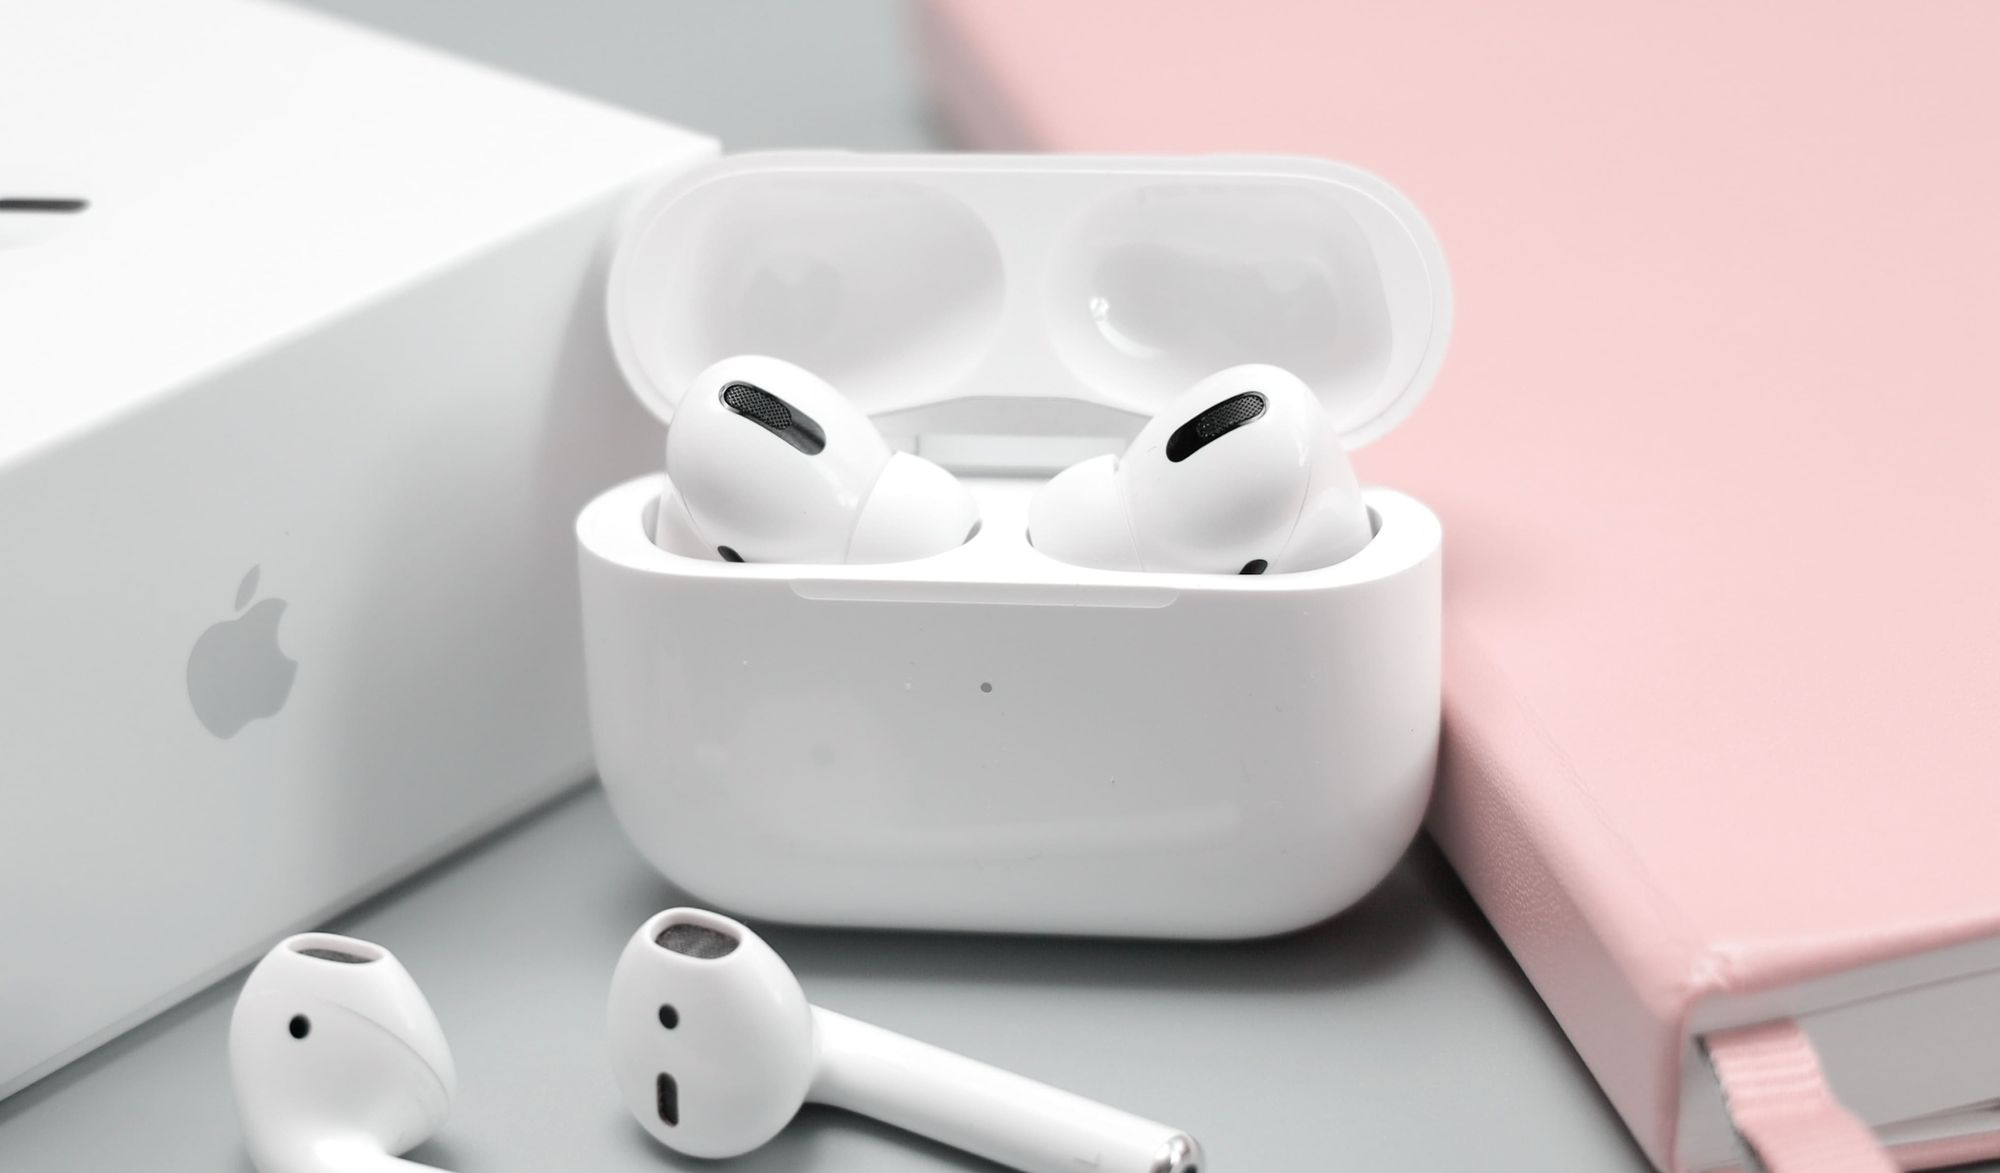 Apple AirPods in a charging case